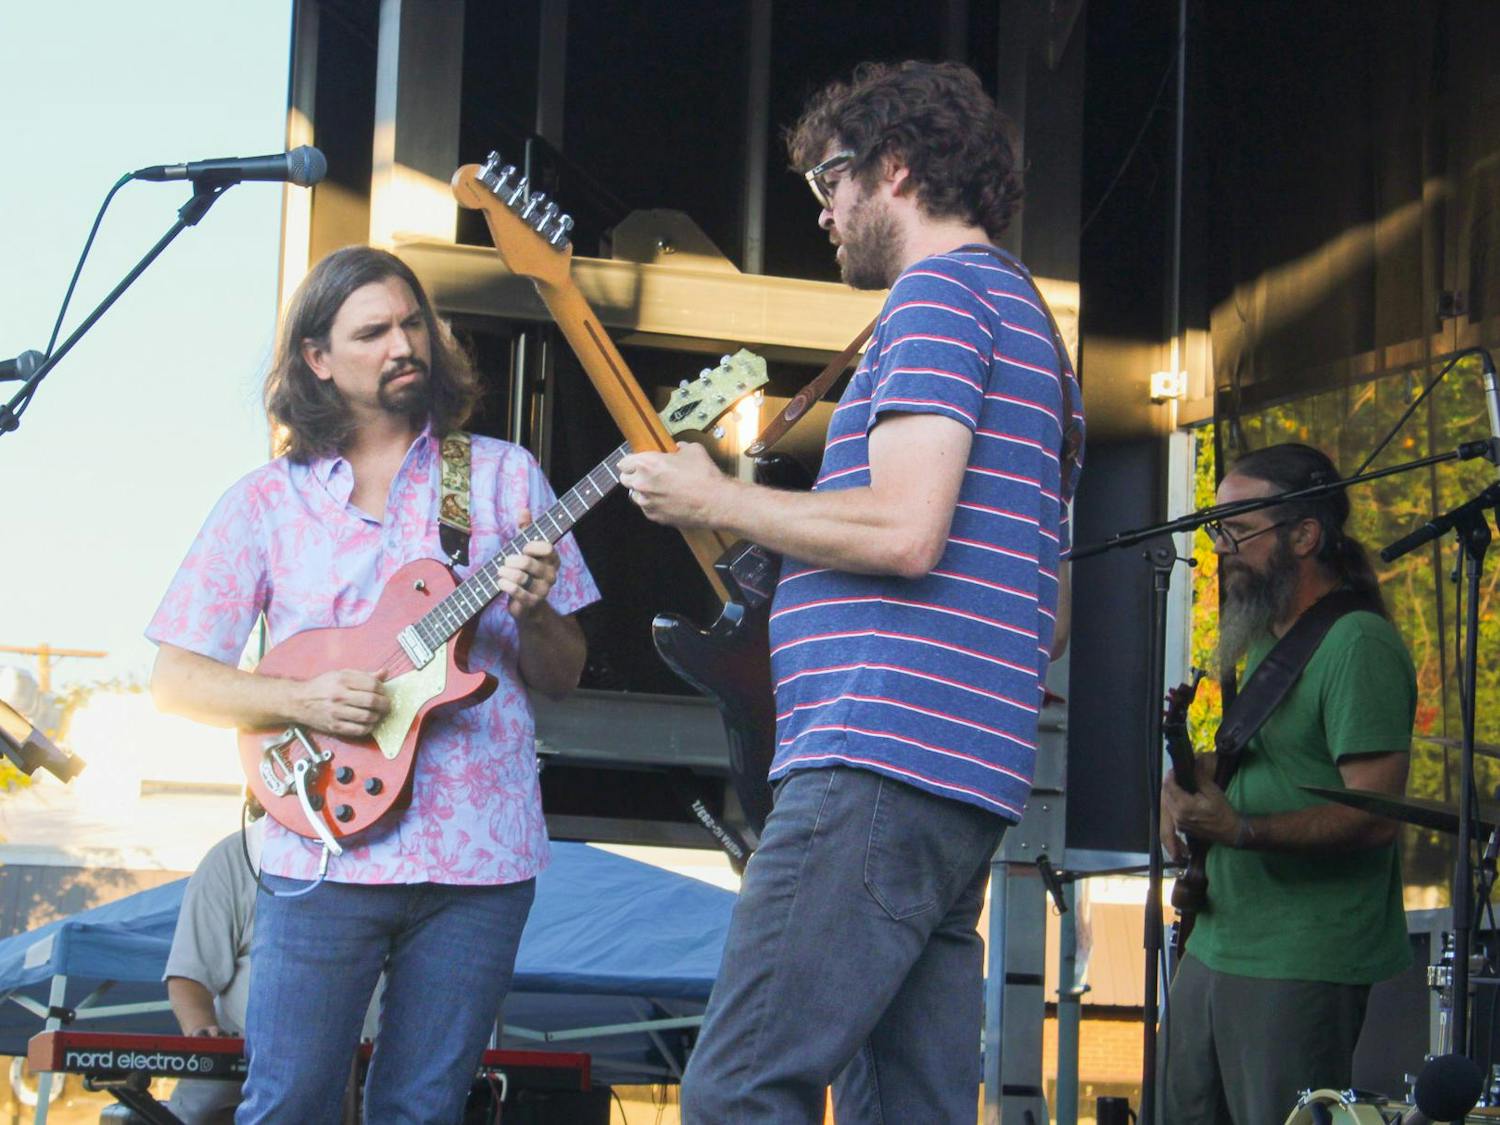 Charleston-based band The Reckoning performs at JerryFest, an annual Grateful Dead and Jerry Garcia tribute festival. The concert took place in Five Points on Oct. 1, 2023.